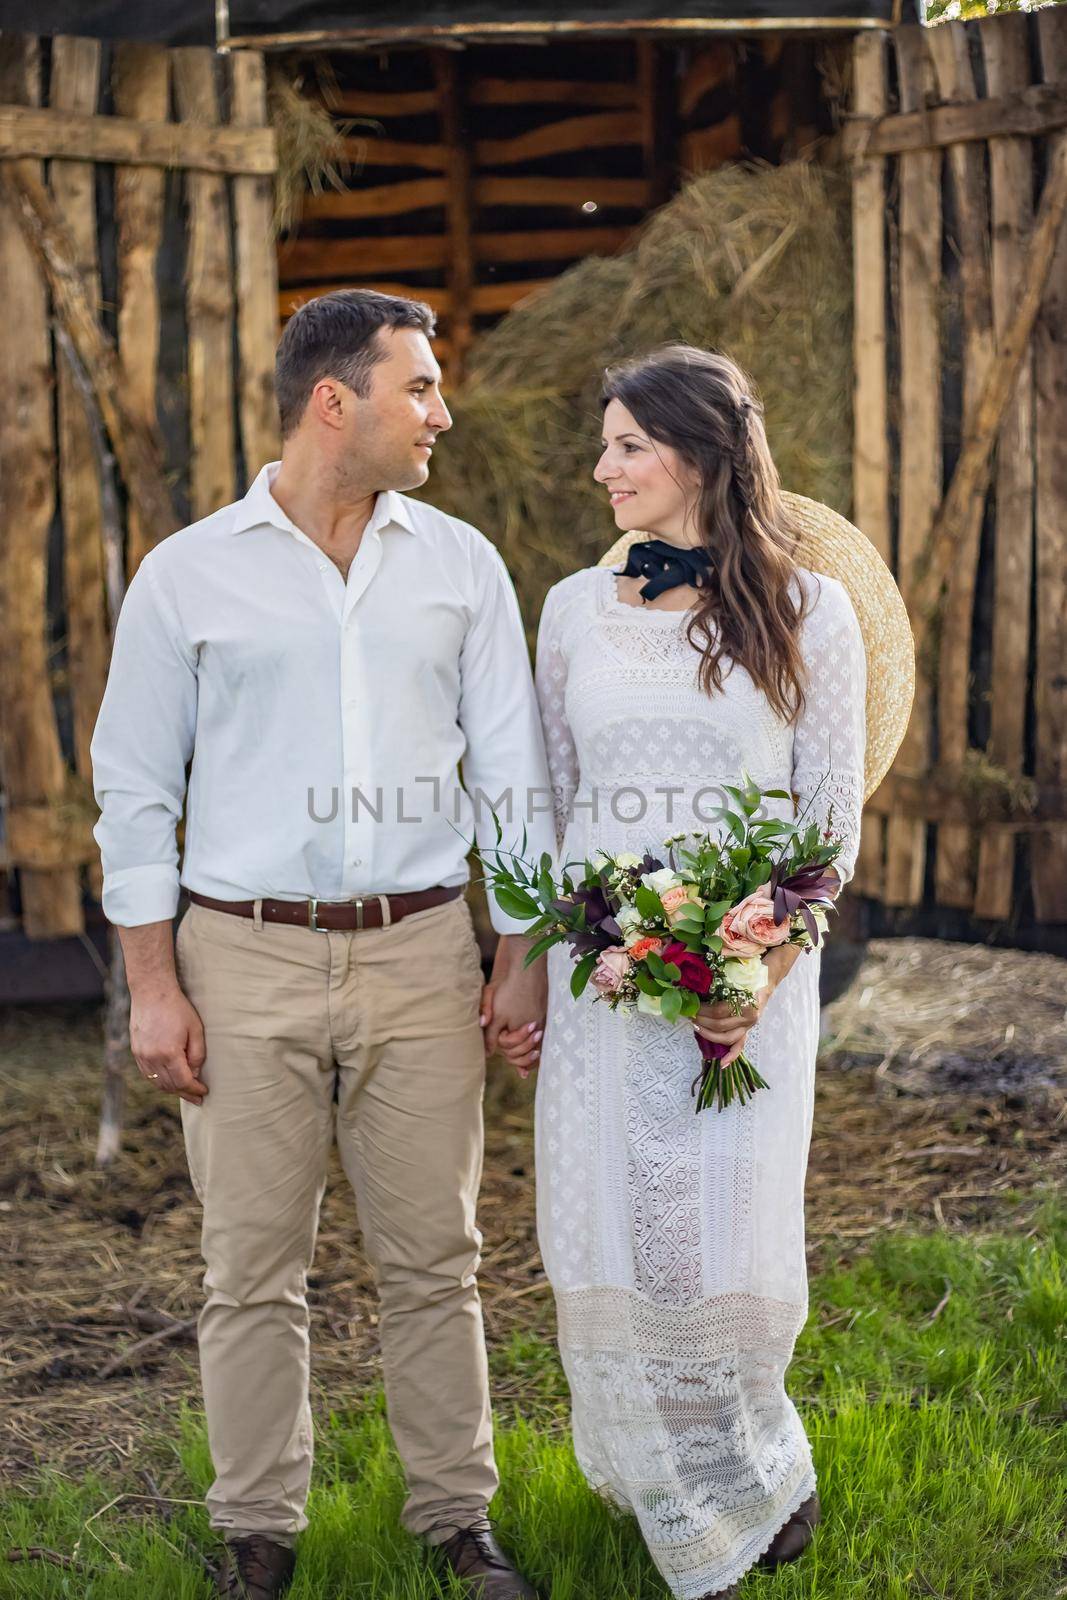 Stylishly dressed handsome groom with a beard in black sunglasses hugs wife. Bride in a dress with a bouquet puts a hat on and laughs. Rustic wedding in the style of boho at the ranch.